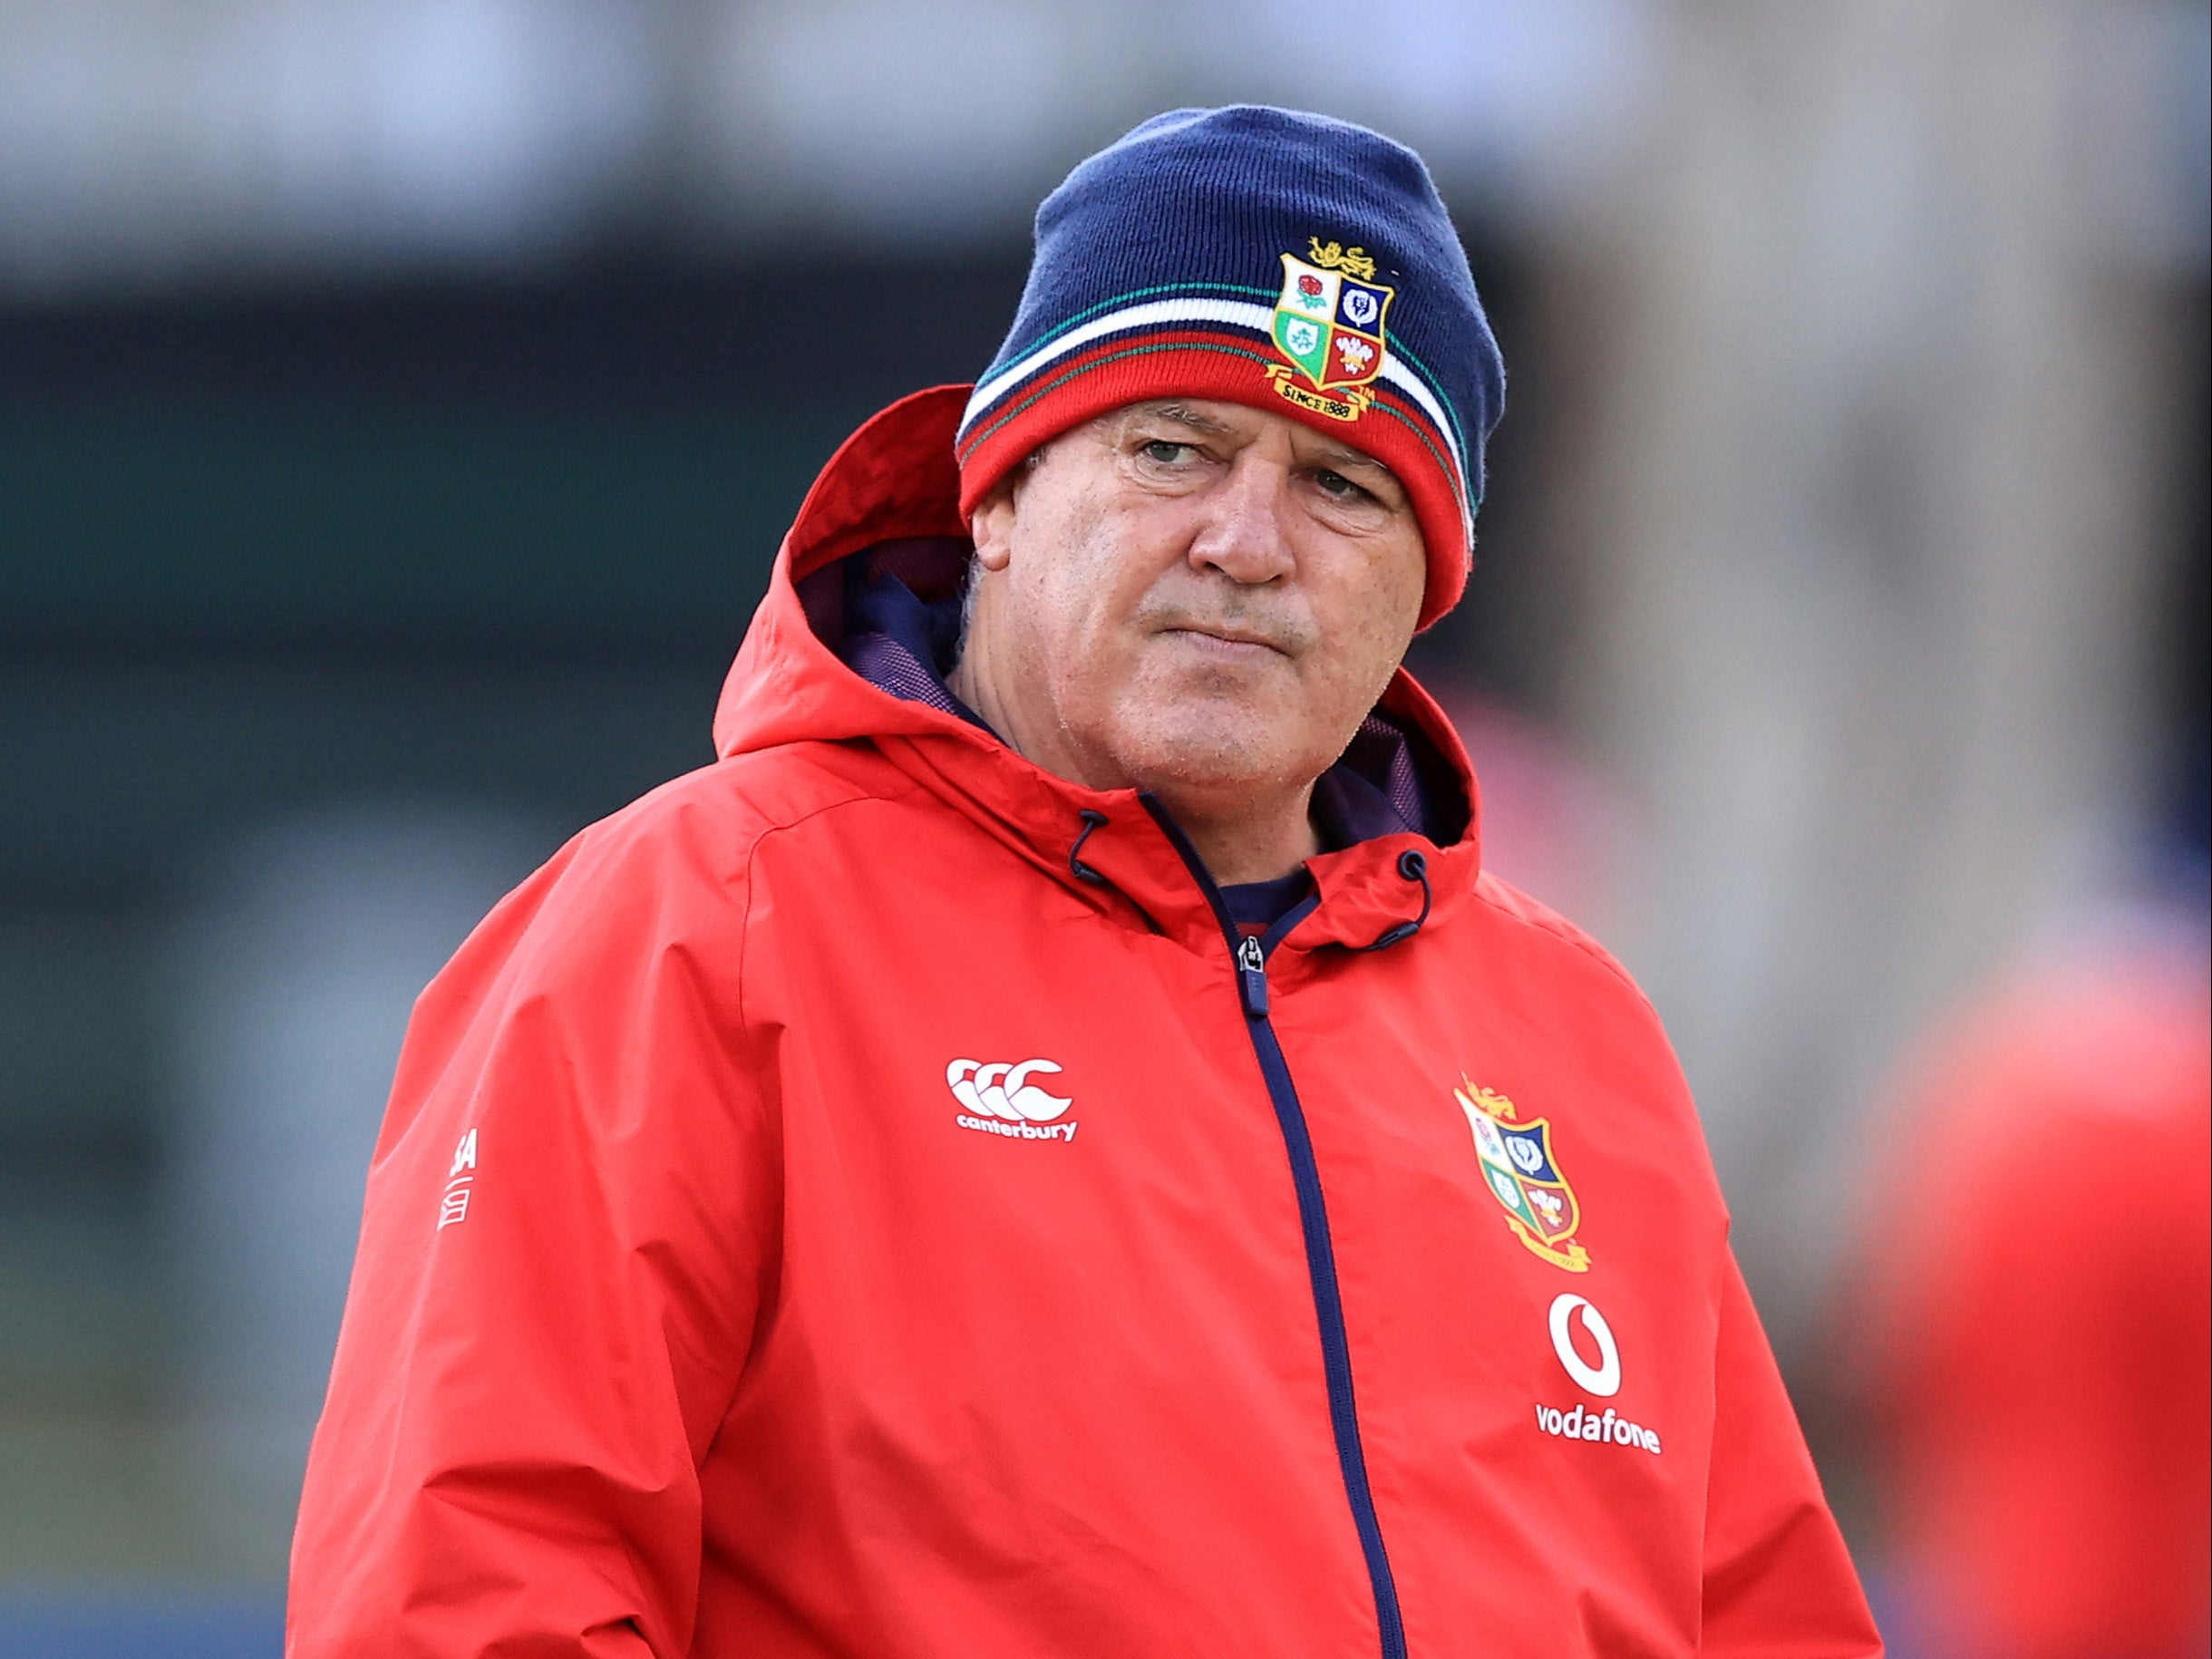 British and Irish Lions boss Warren Gatland, pictured, is understood to be angry with the appointment of a South African Television Match Official for the first Test match against the Springboks (David Rogers)